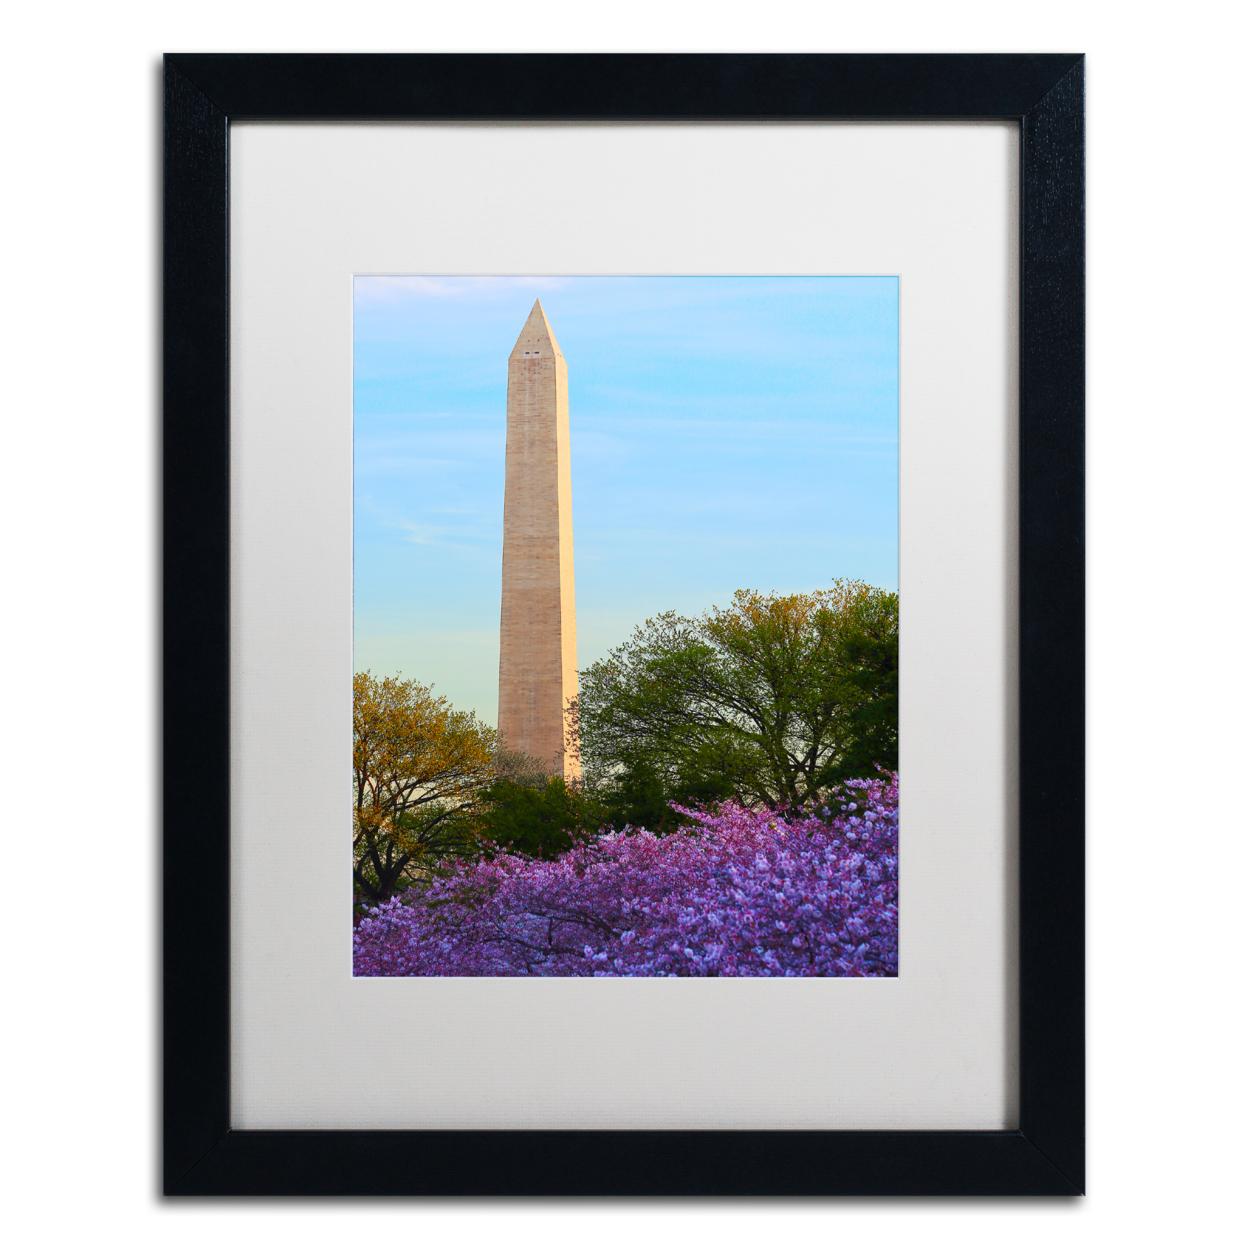 CATeyes 'Washington Monument Spring' Black Wooden Framed Art 18 X 22 Inches